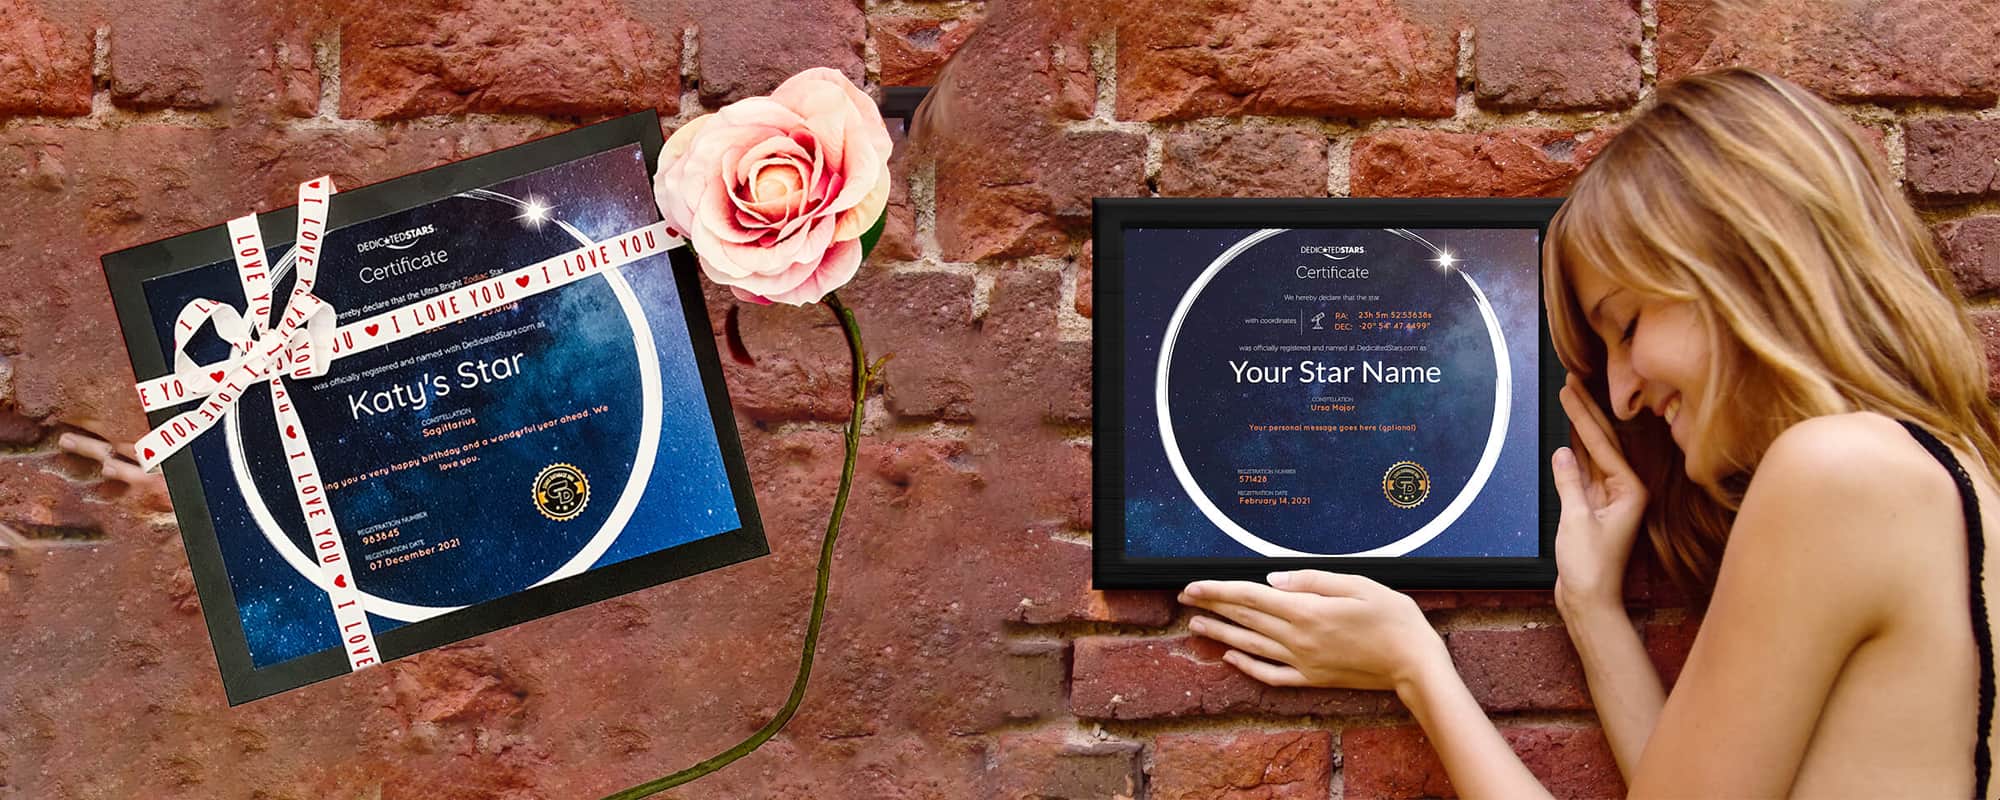 WIN A Star with Dedicated Stars